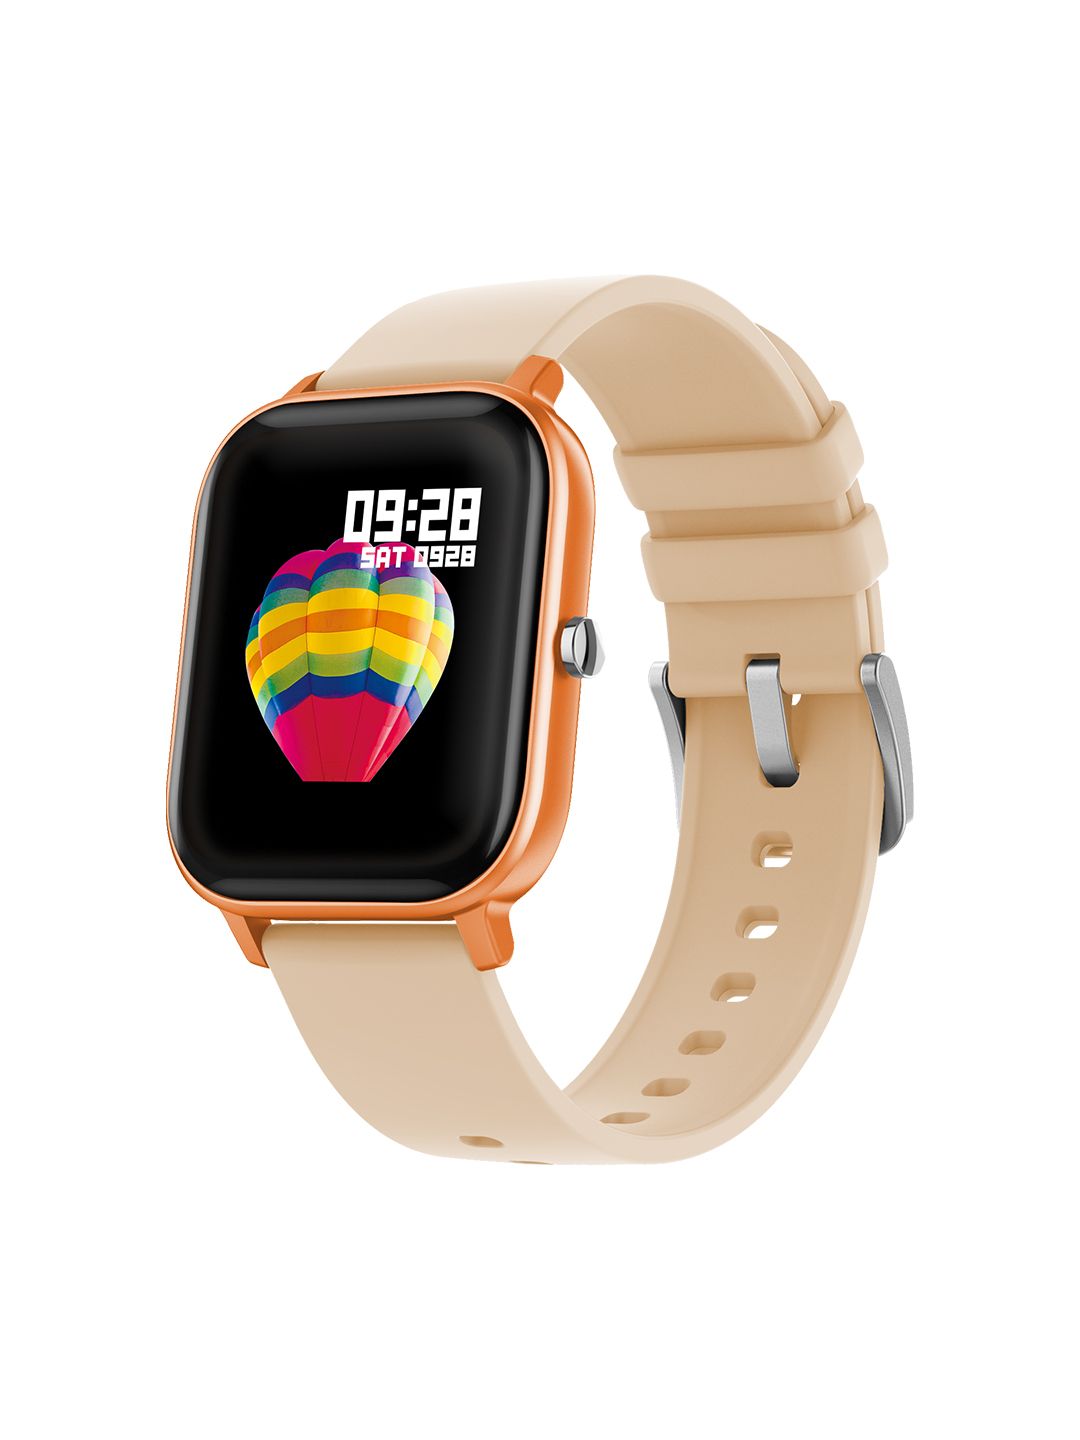 Fire-Boltt SpO2 Unisex Full Touch Smartwatch 01BSWAAY - Gold-Toned Price in India